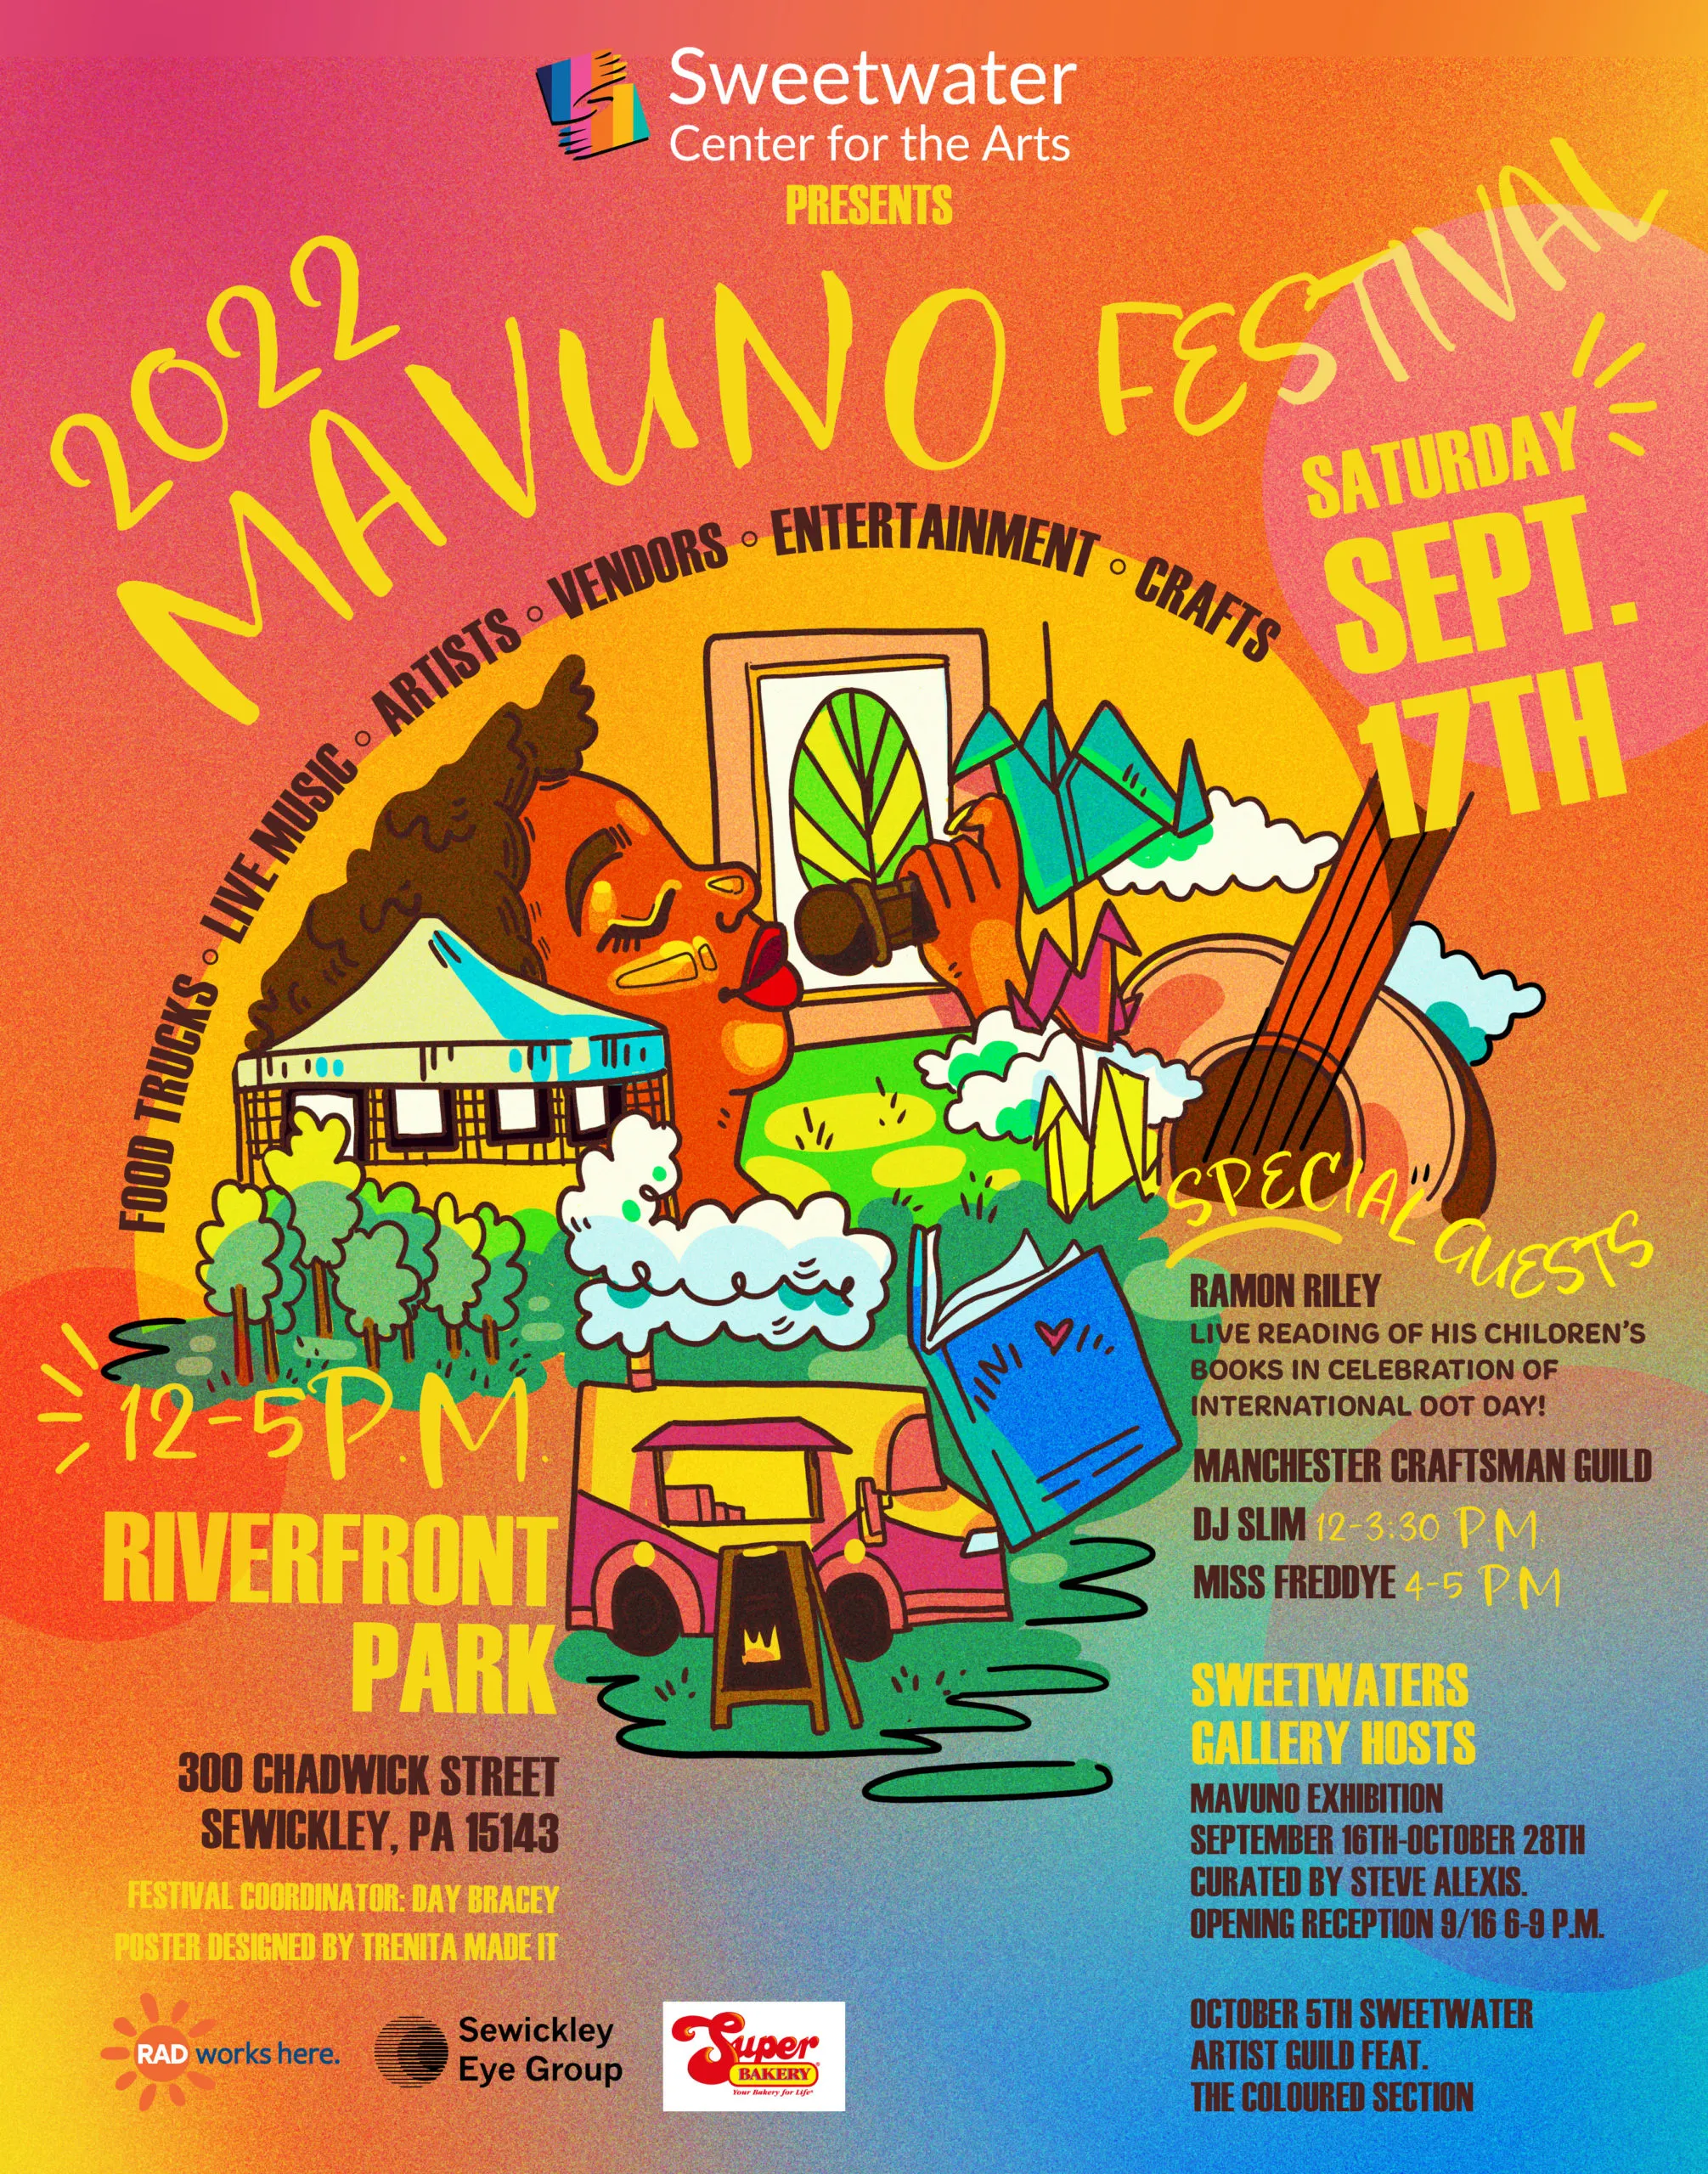 Information about Mavuno Festival - Noon to 5 PM on September 17 at Riverfront Park in Sewickley